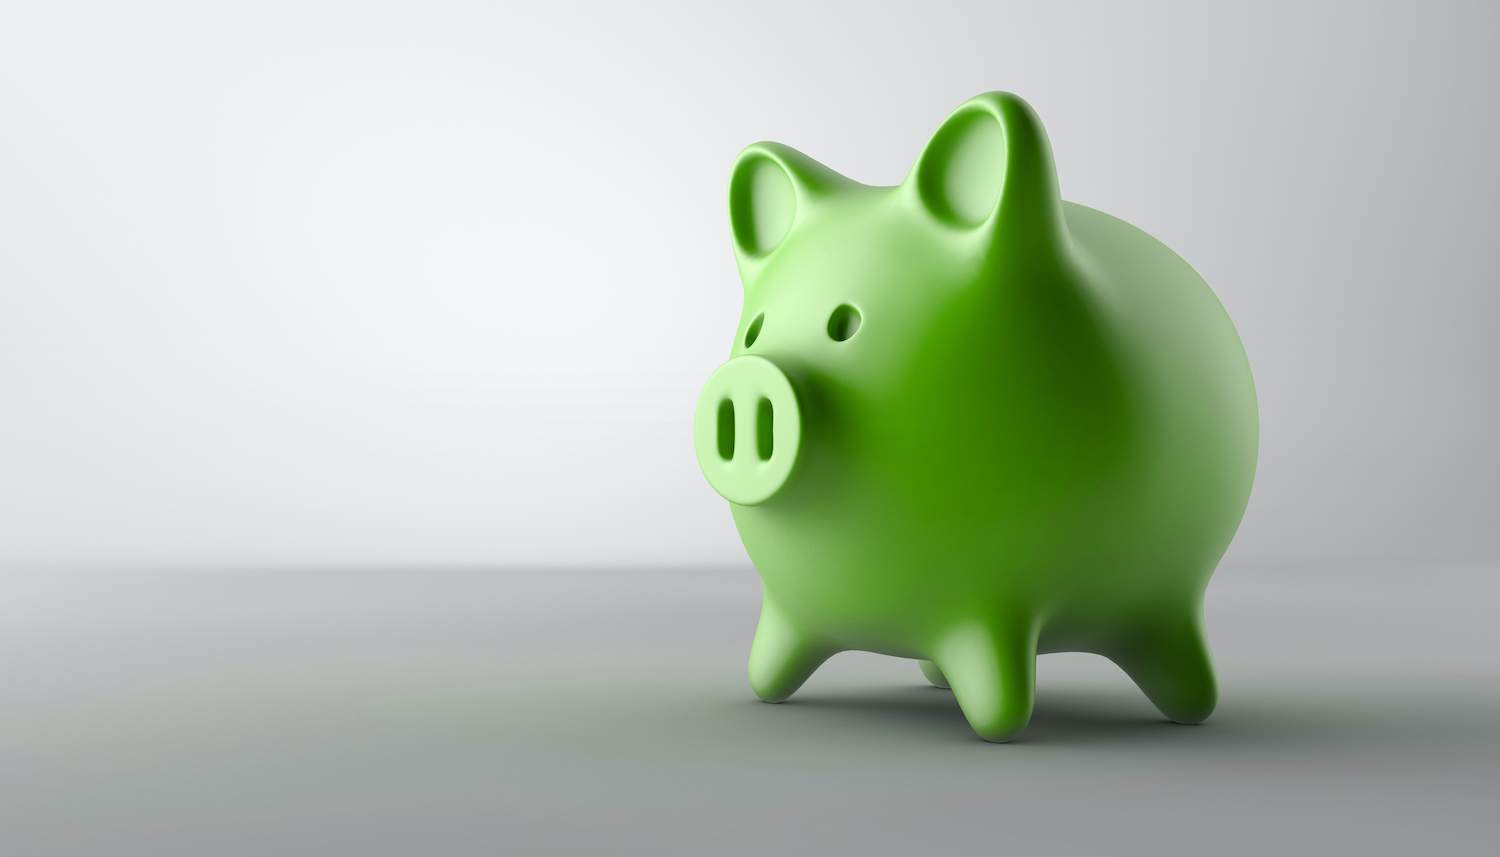 A green piggy bank on a grayscale background to indicate savings with Delta Dental insurance